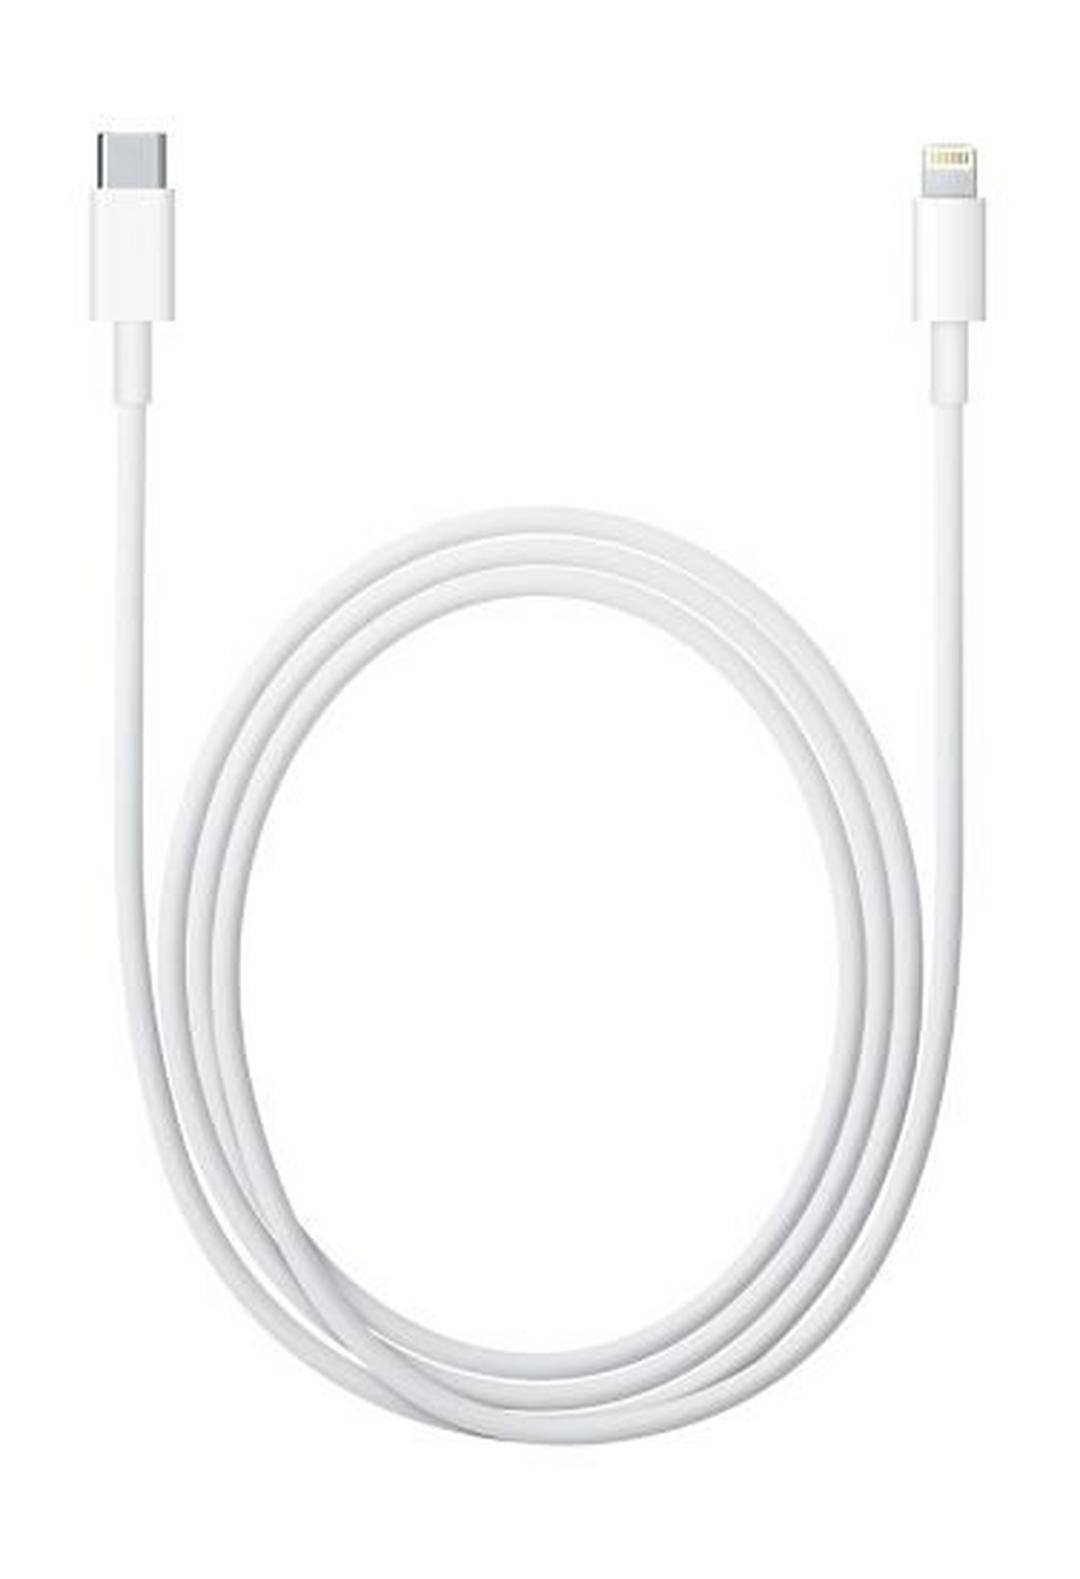 Apple USB-C to Lightning Cable 1 Meter (MK0X2AM/A) - White